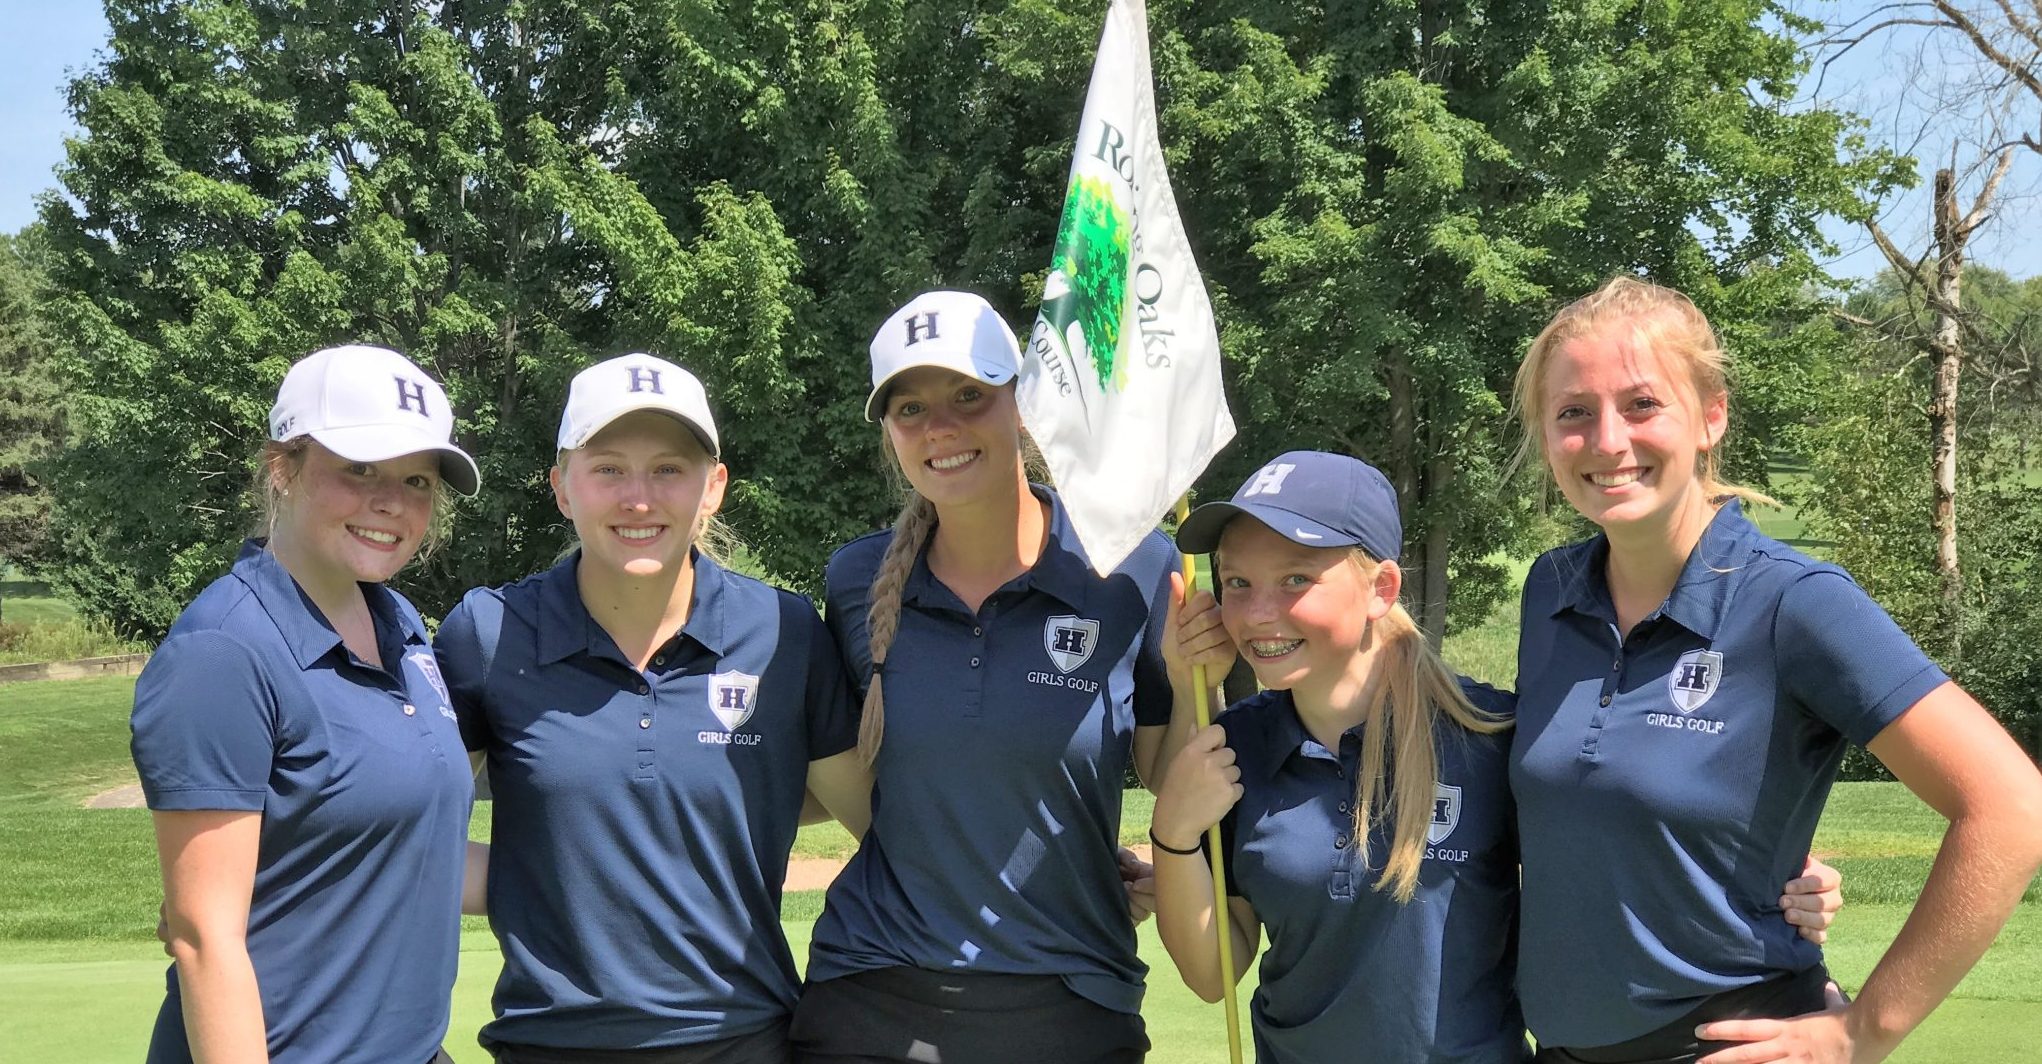 Five members of the girls golf team pose following their game.